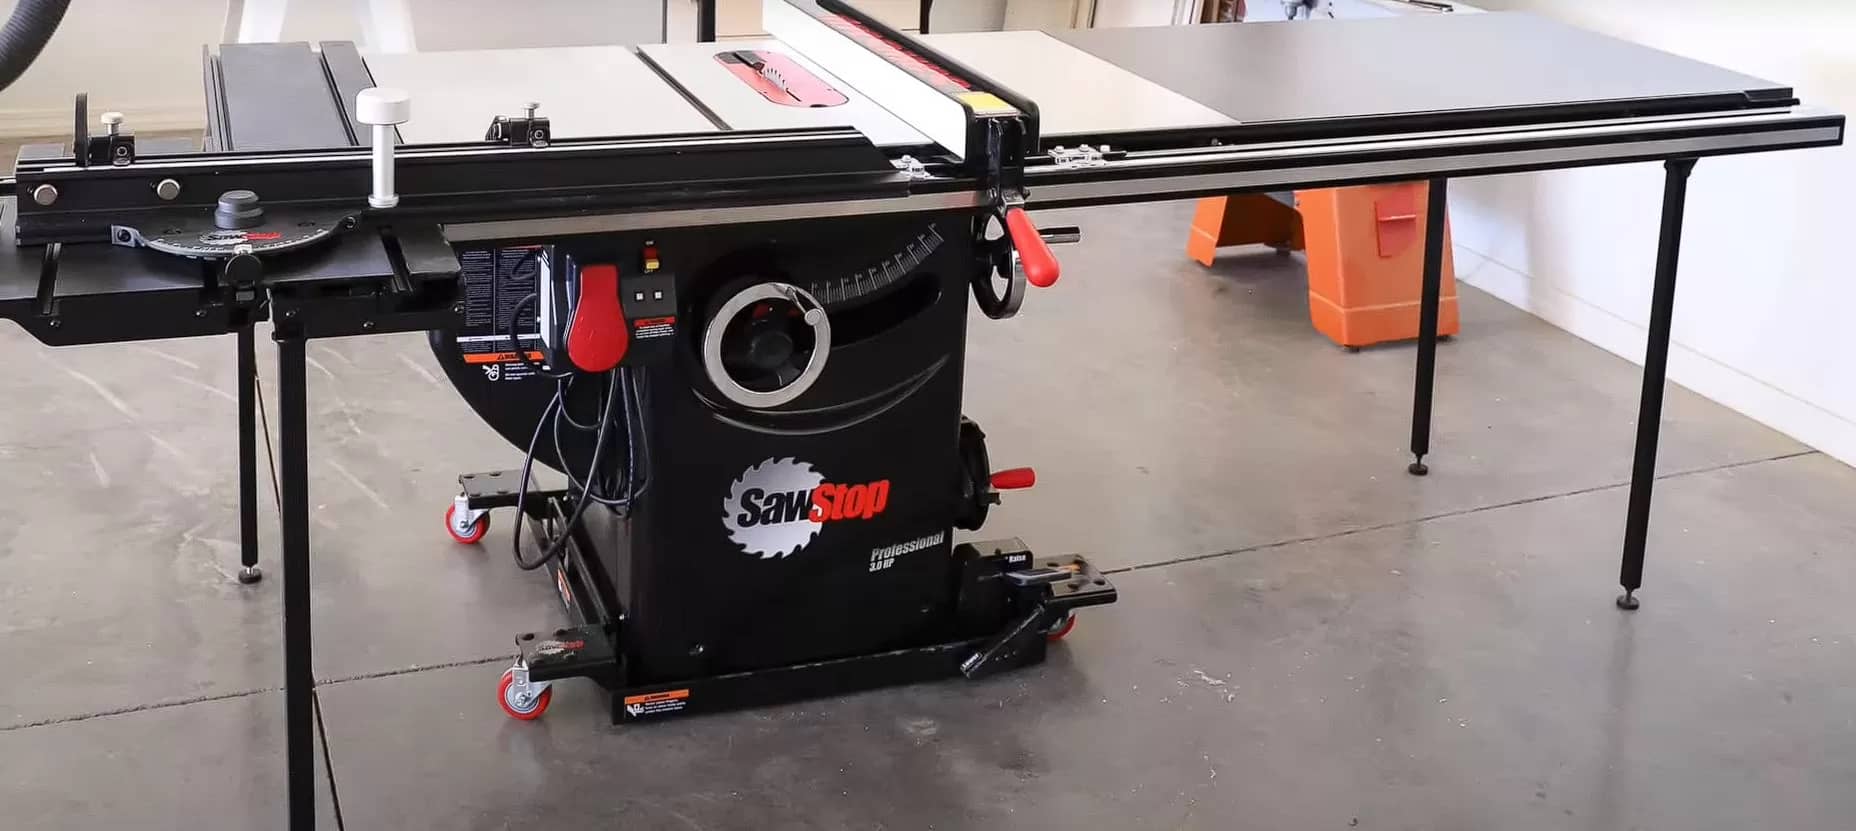 Sawstop 10-Inch Professional Cabinet Saw Review